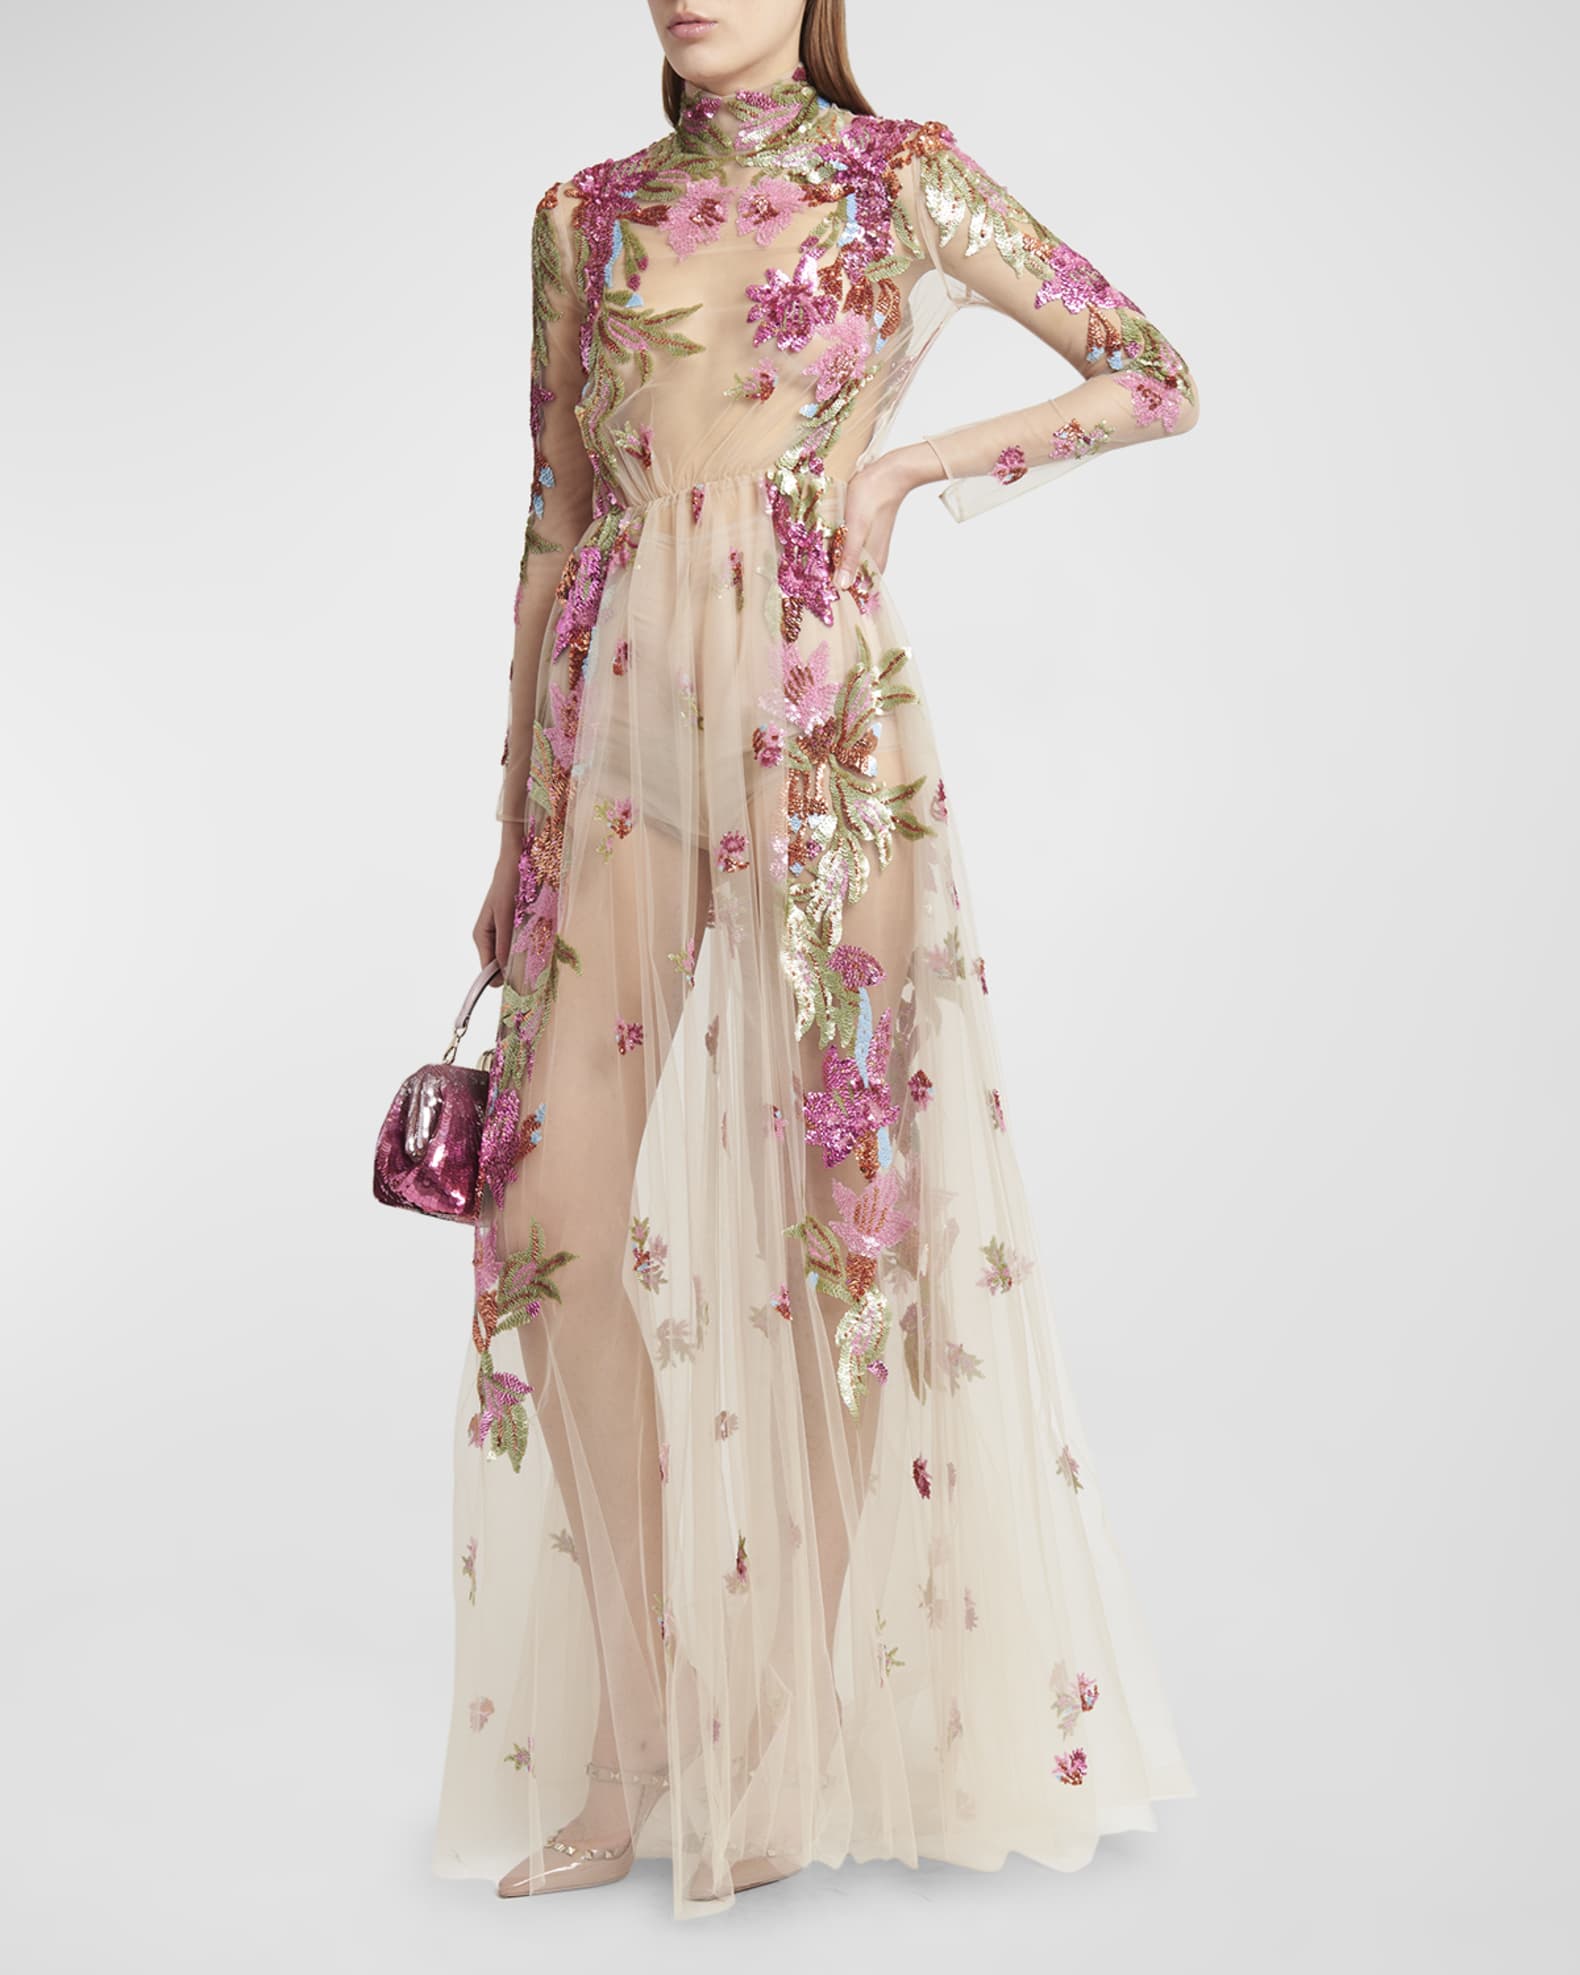 Valentino Garavani Embroidered Tulle Illusion Gown with Floral Details